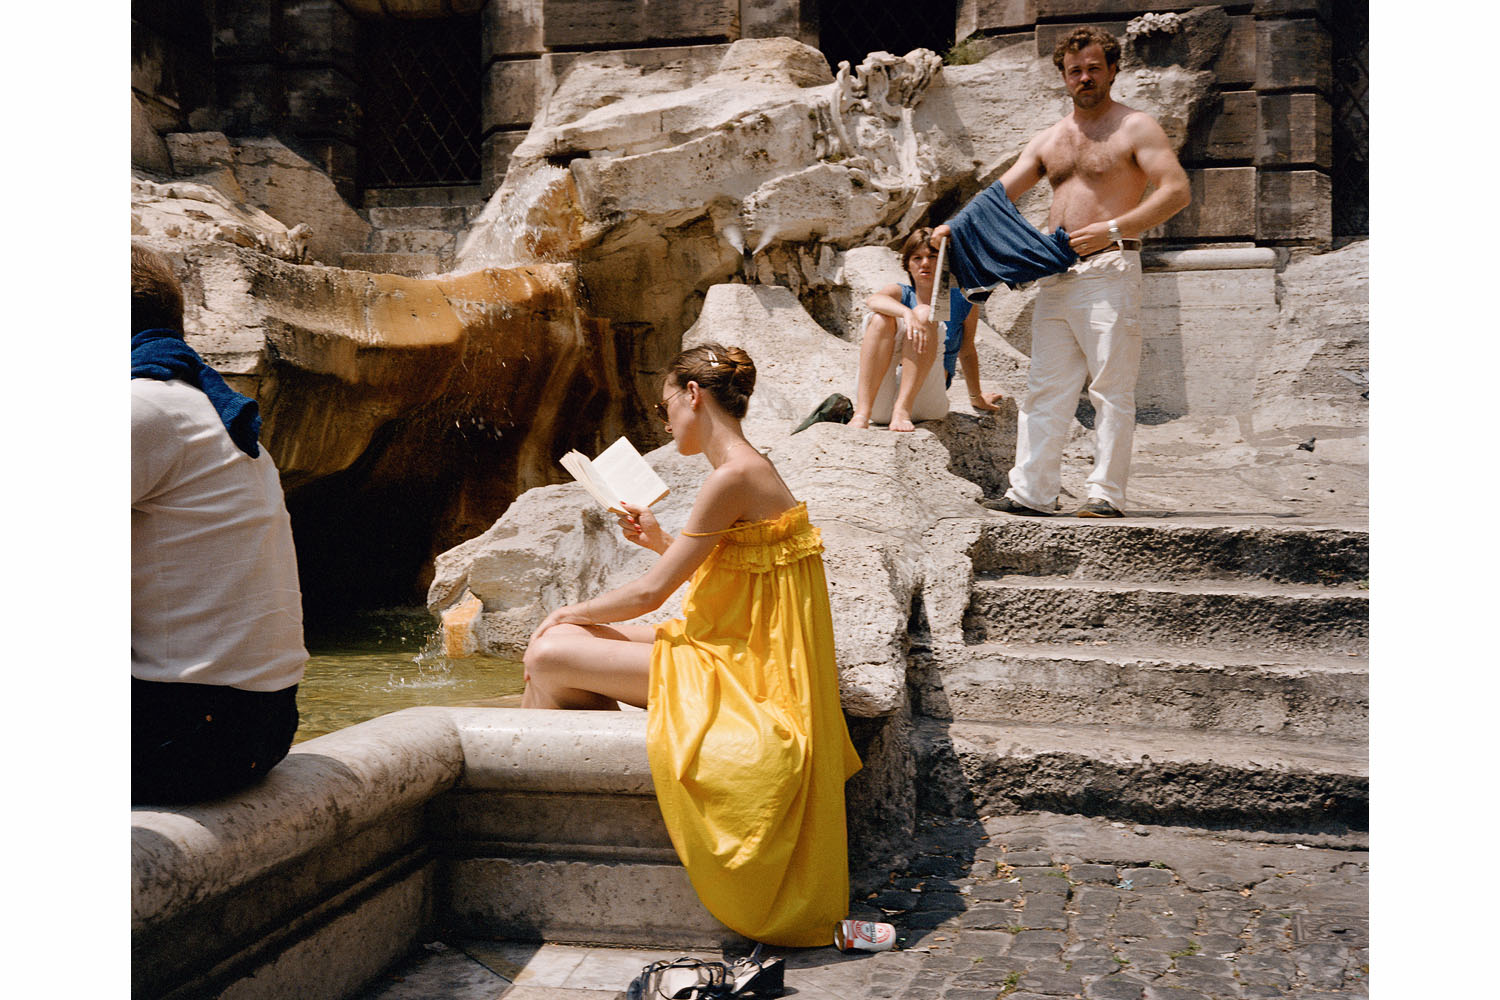 From Charles Traub's  Dolce Via,  published by Damiani